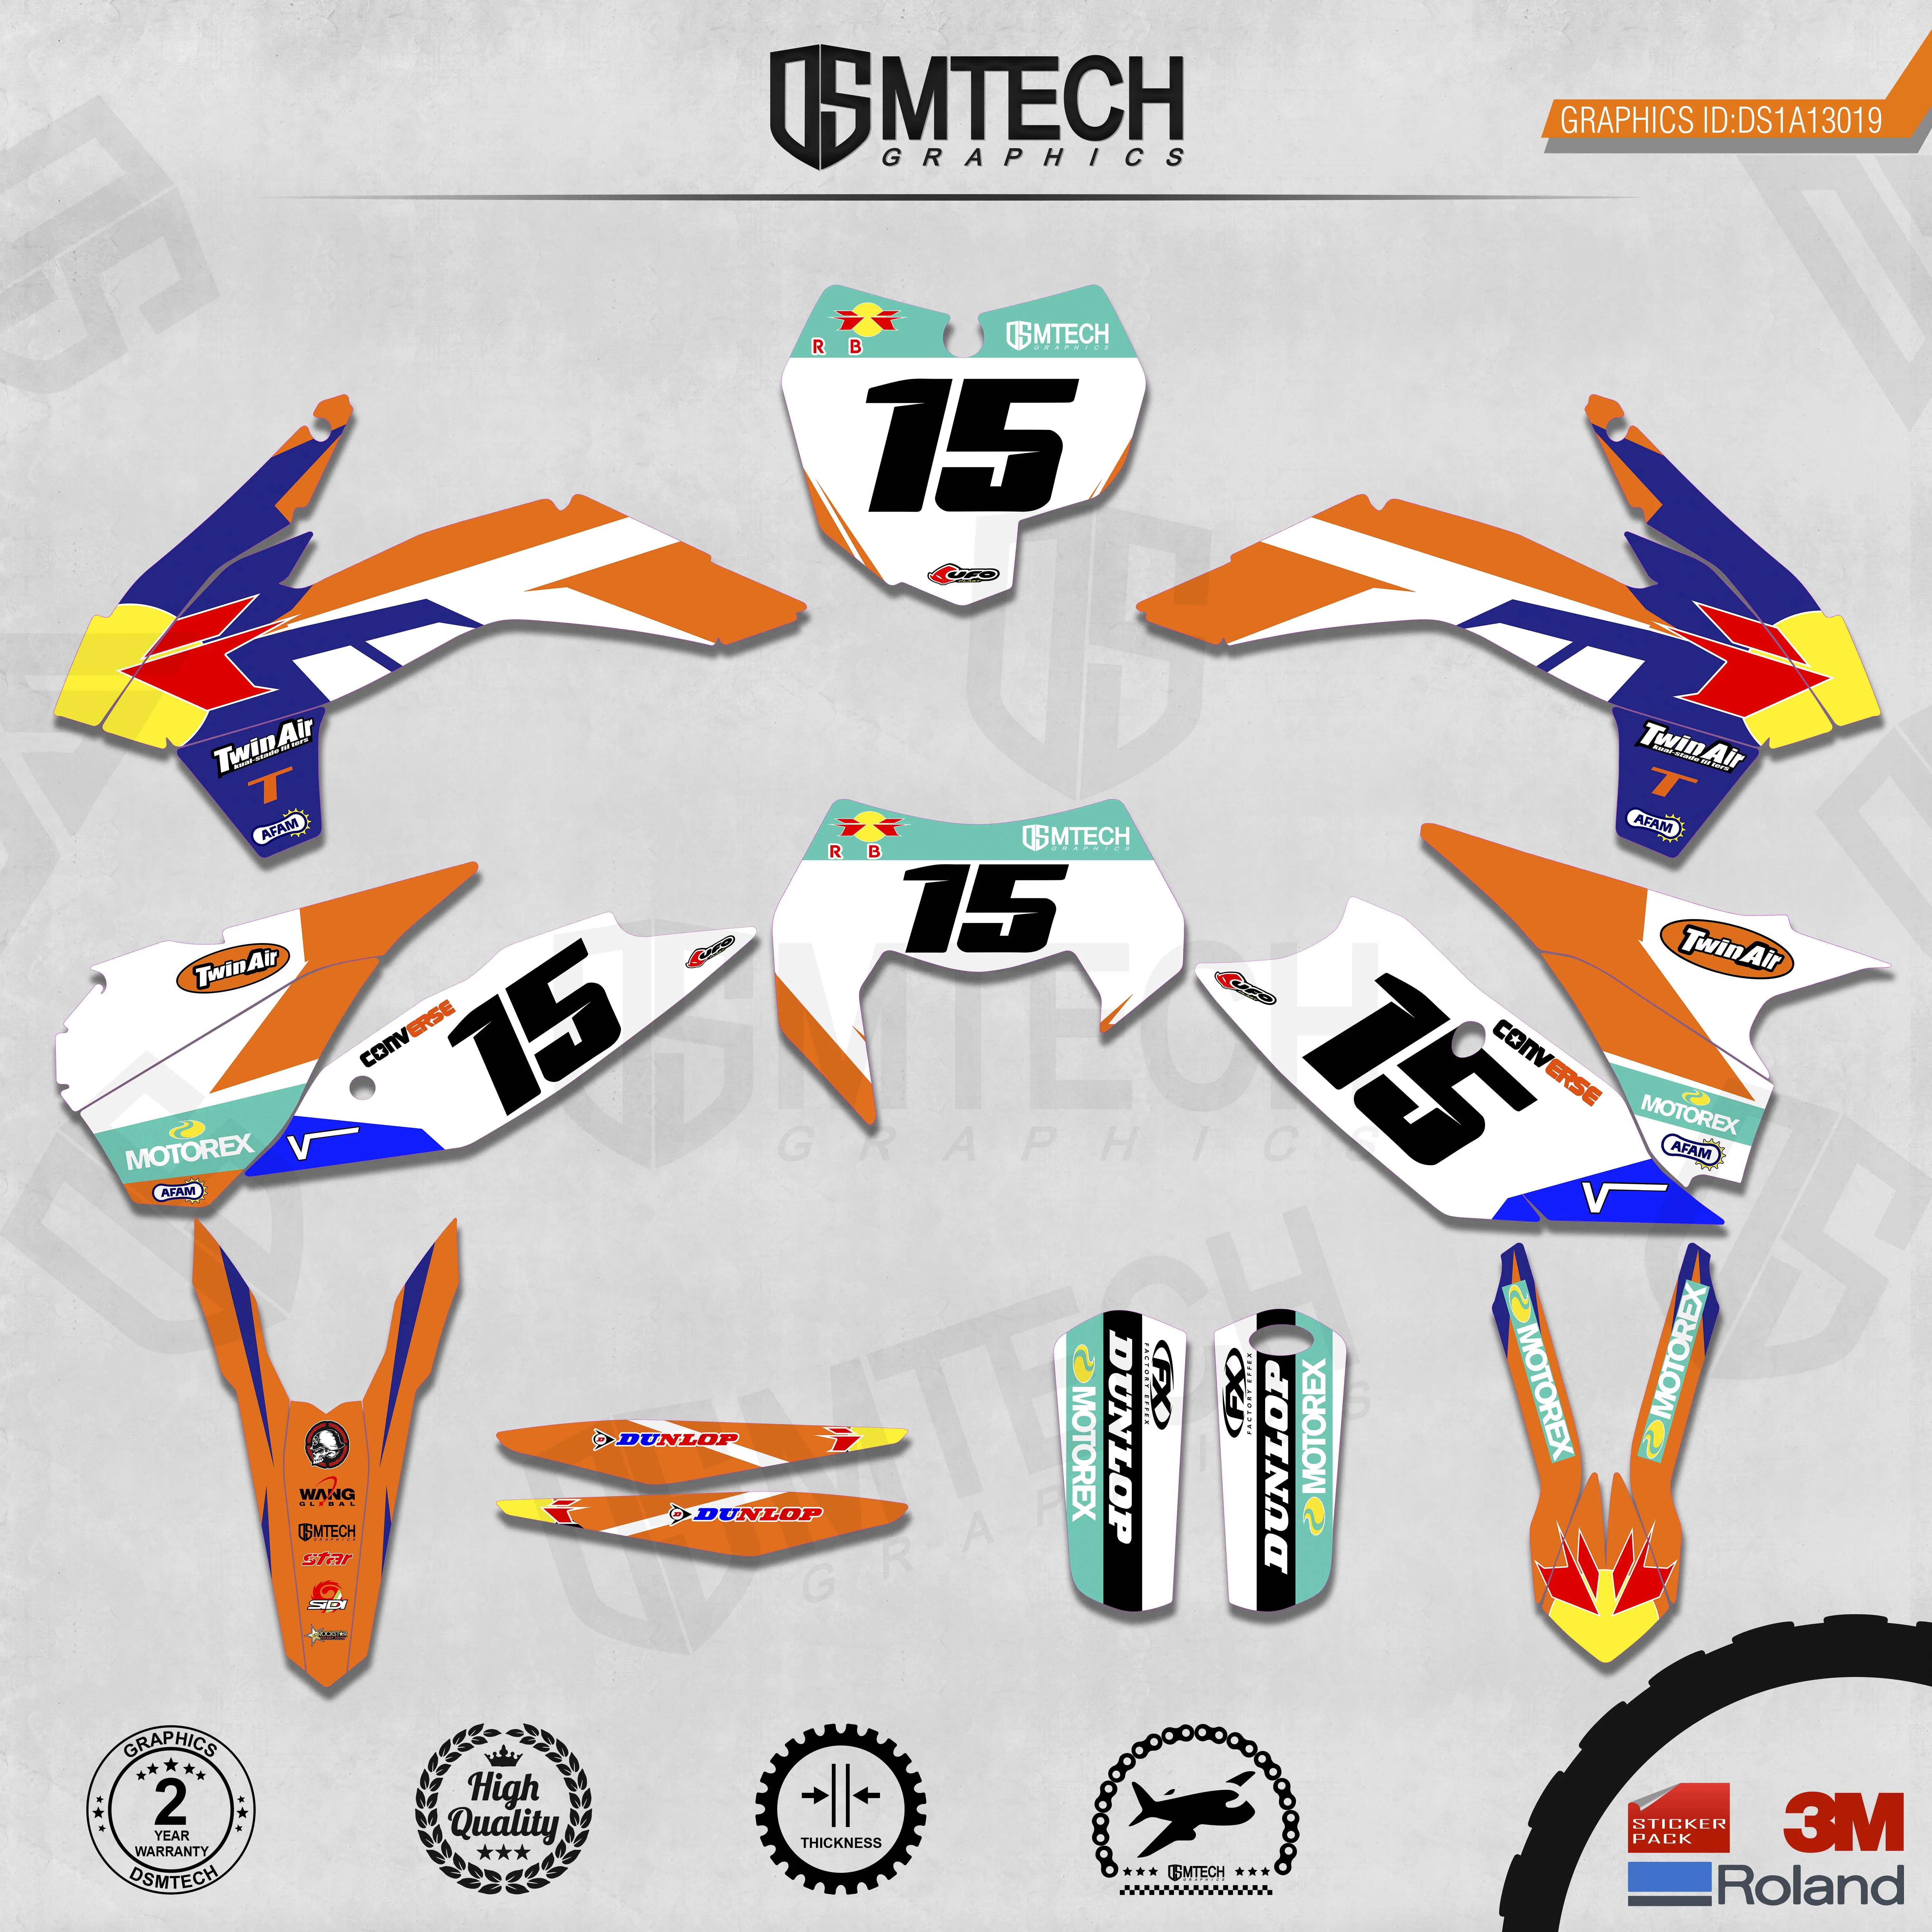 DSMTECH Customized Team Graphics Backgrounds Decals 3M Custom Stickers For 2013-2014 SXF 2015 SXF 2014-2015 EXC 2016 EXC  019